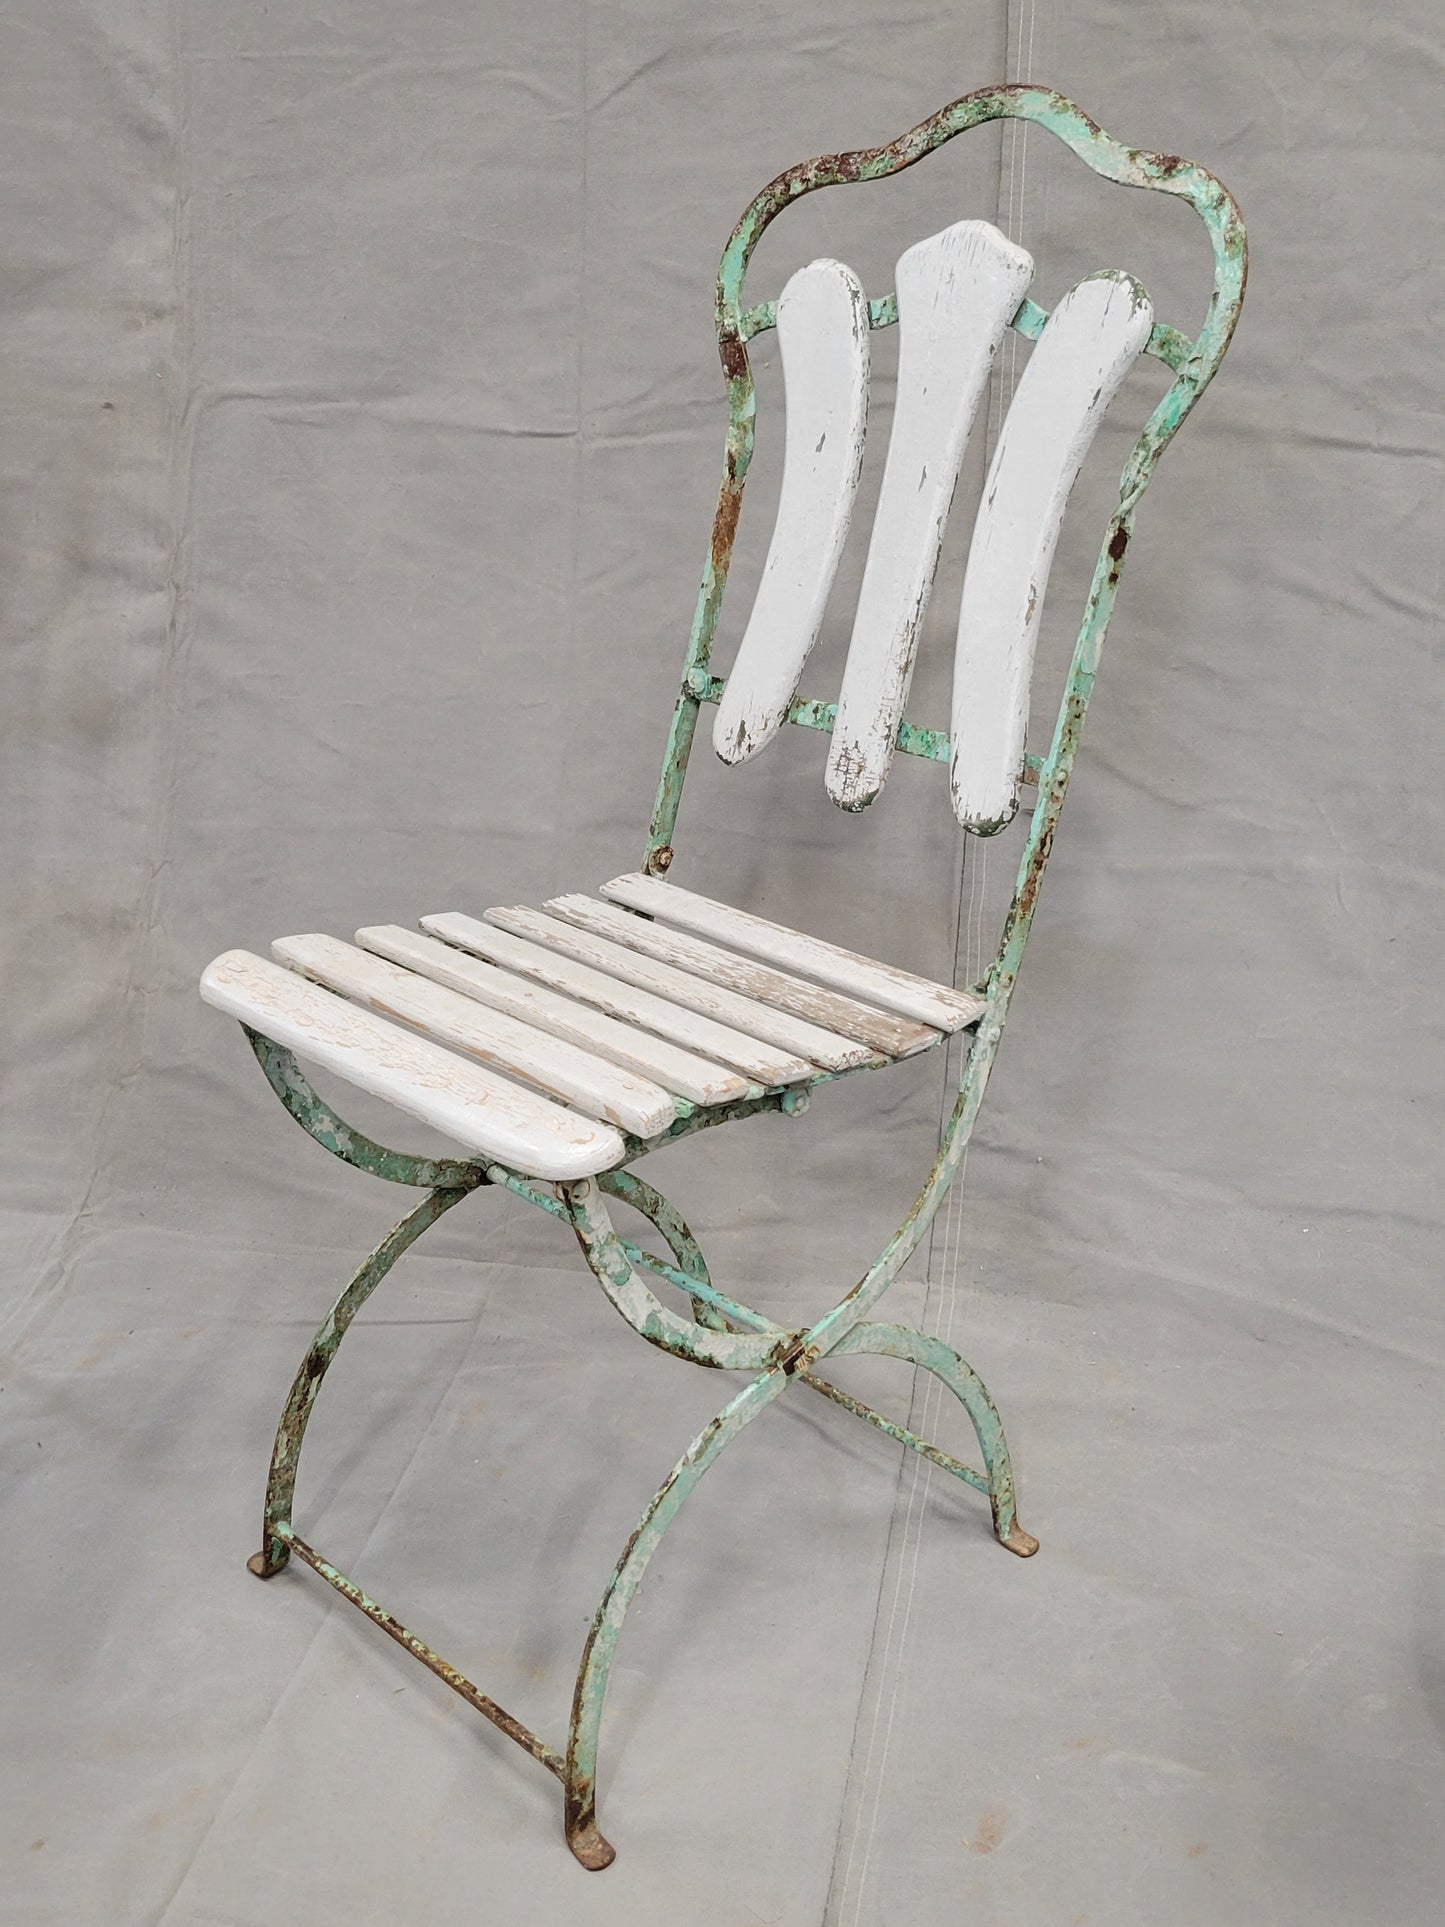 Antique French Iron and Wood Folding Bistro Garden Chairs - Set of 3